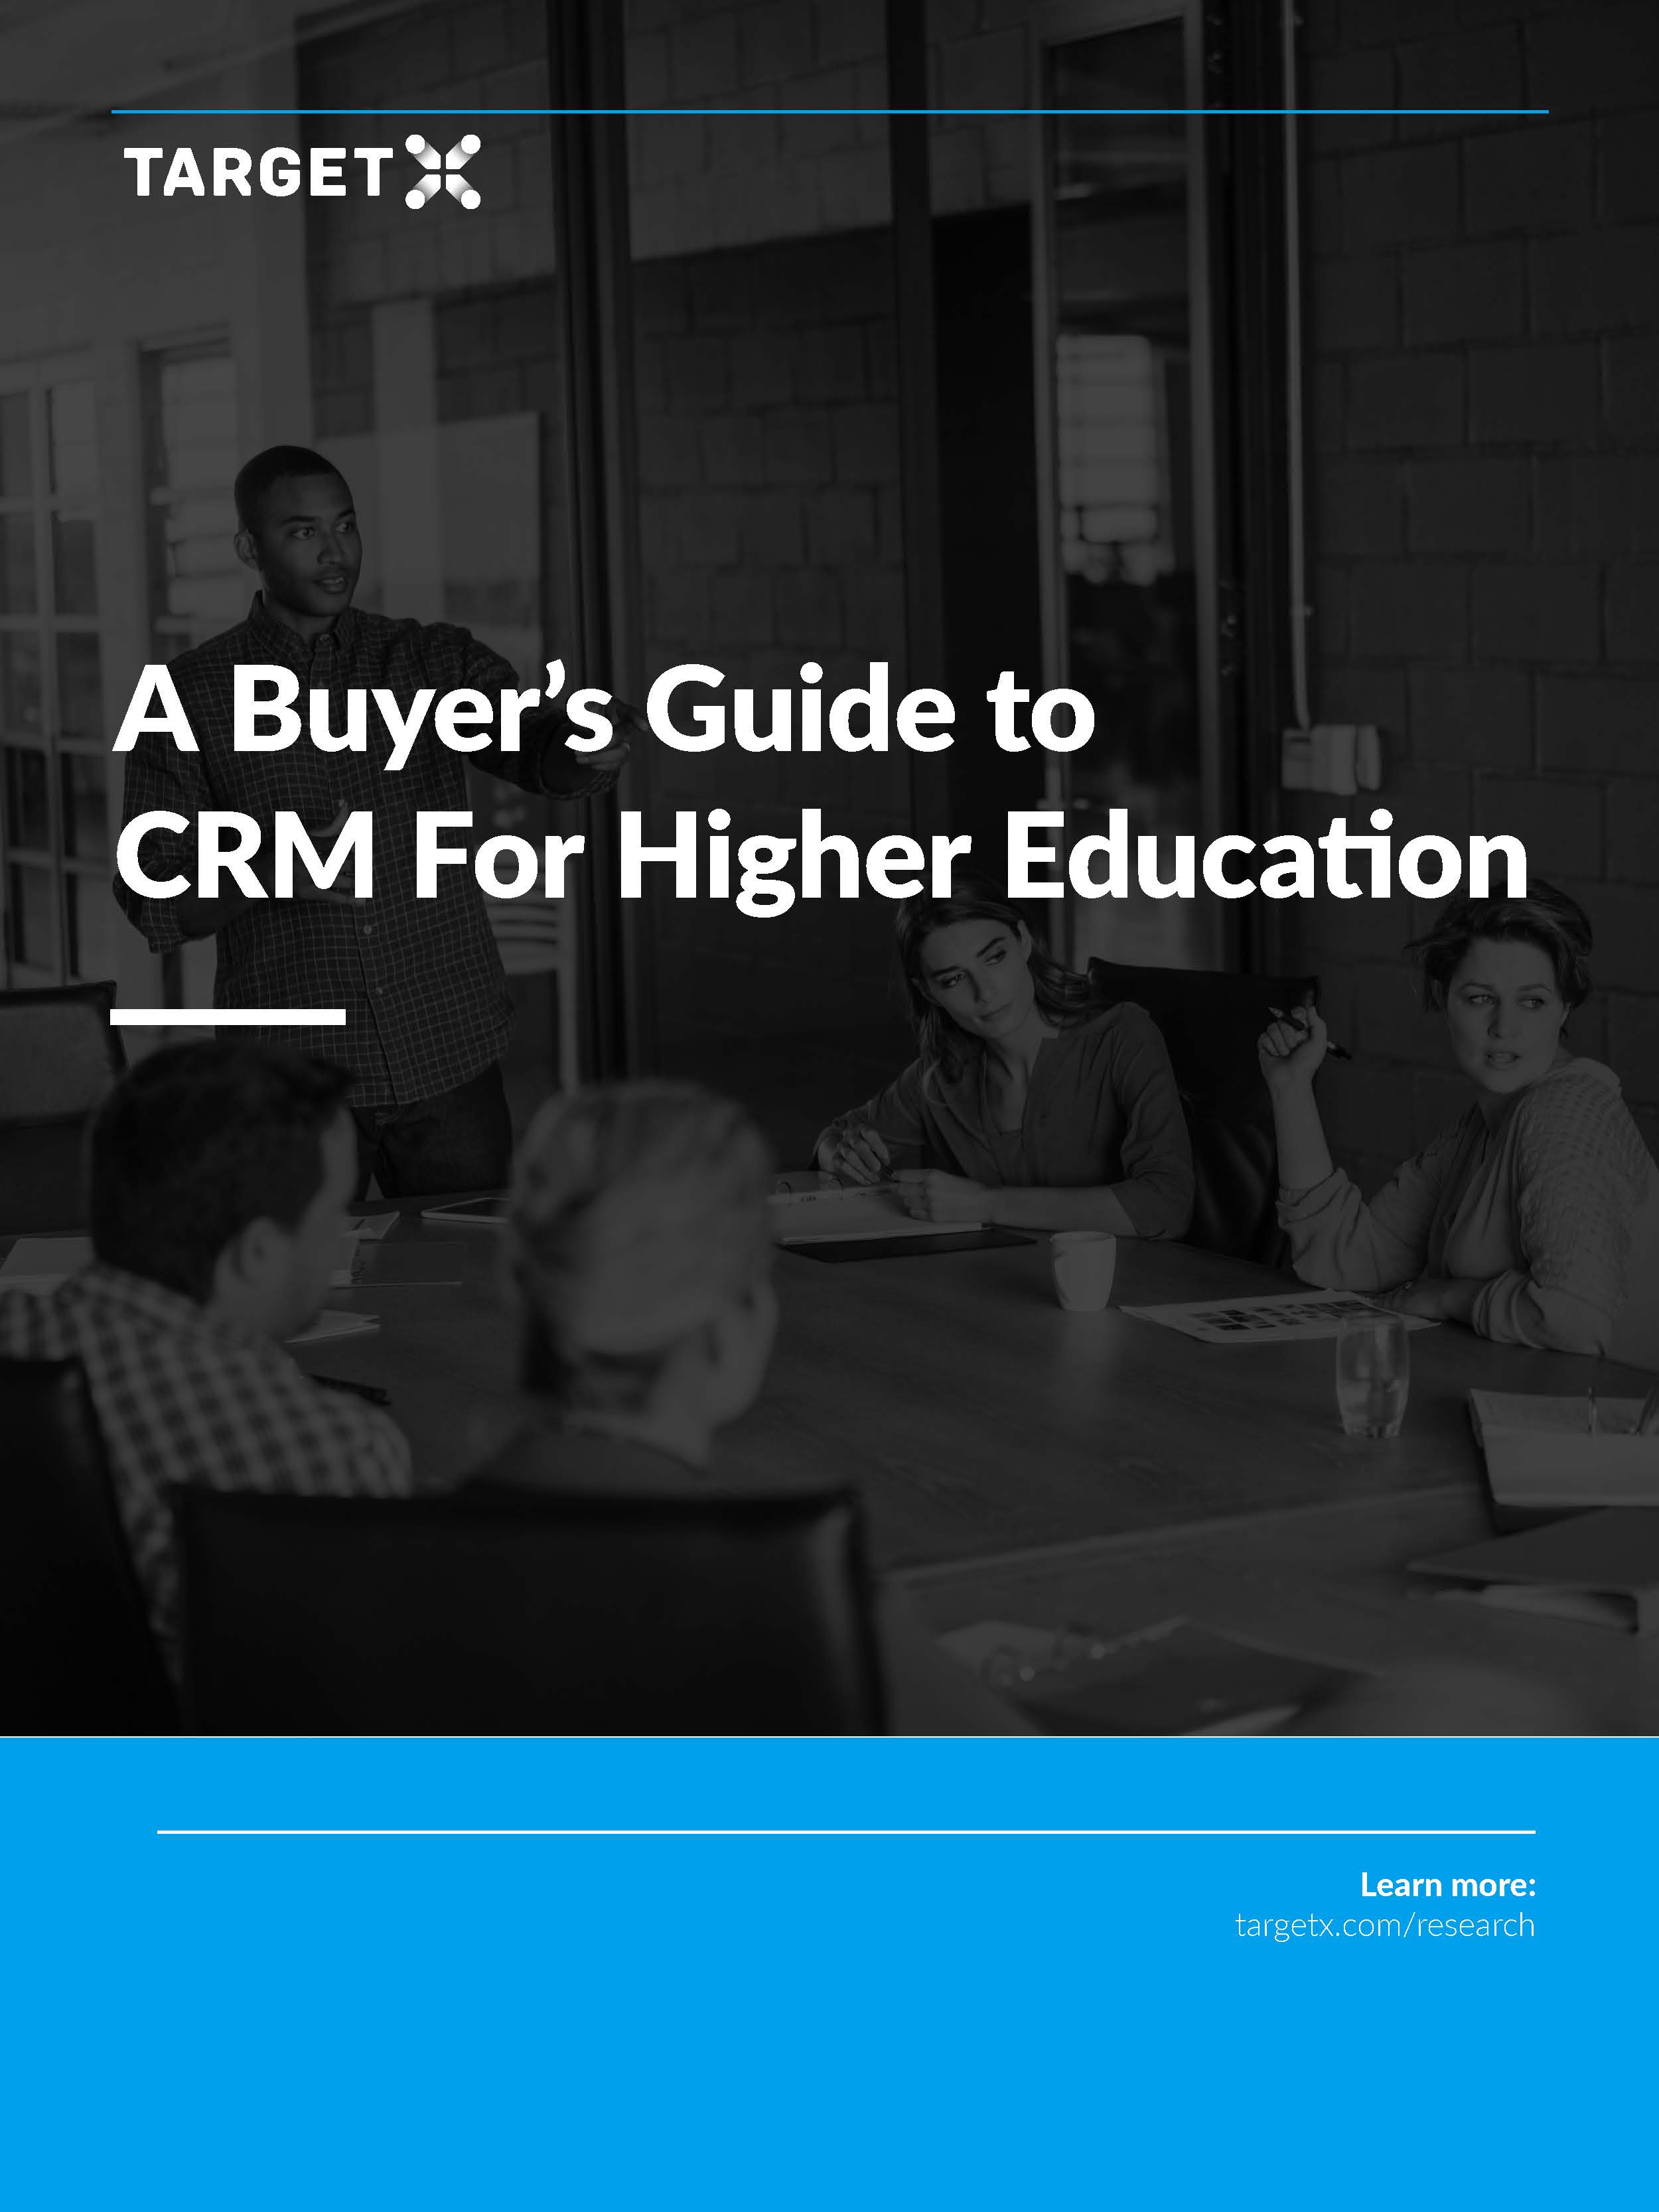 A Buyer’s Guide to CRM for Higher Education